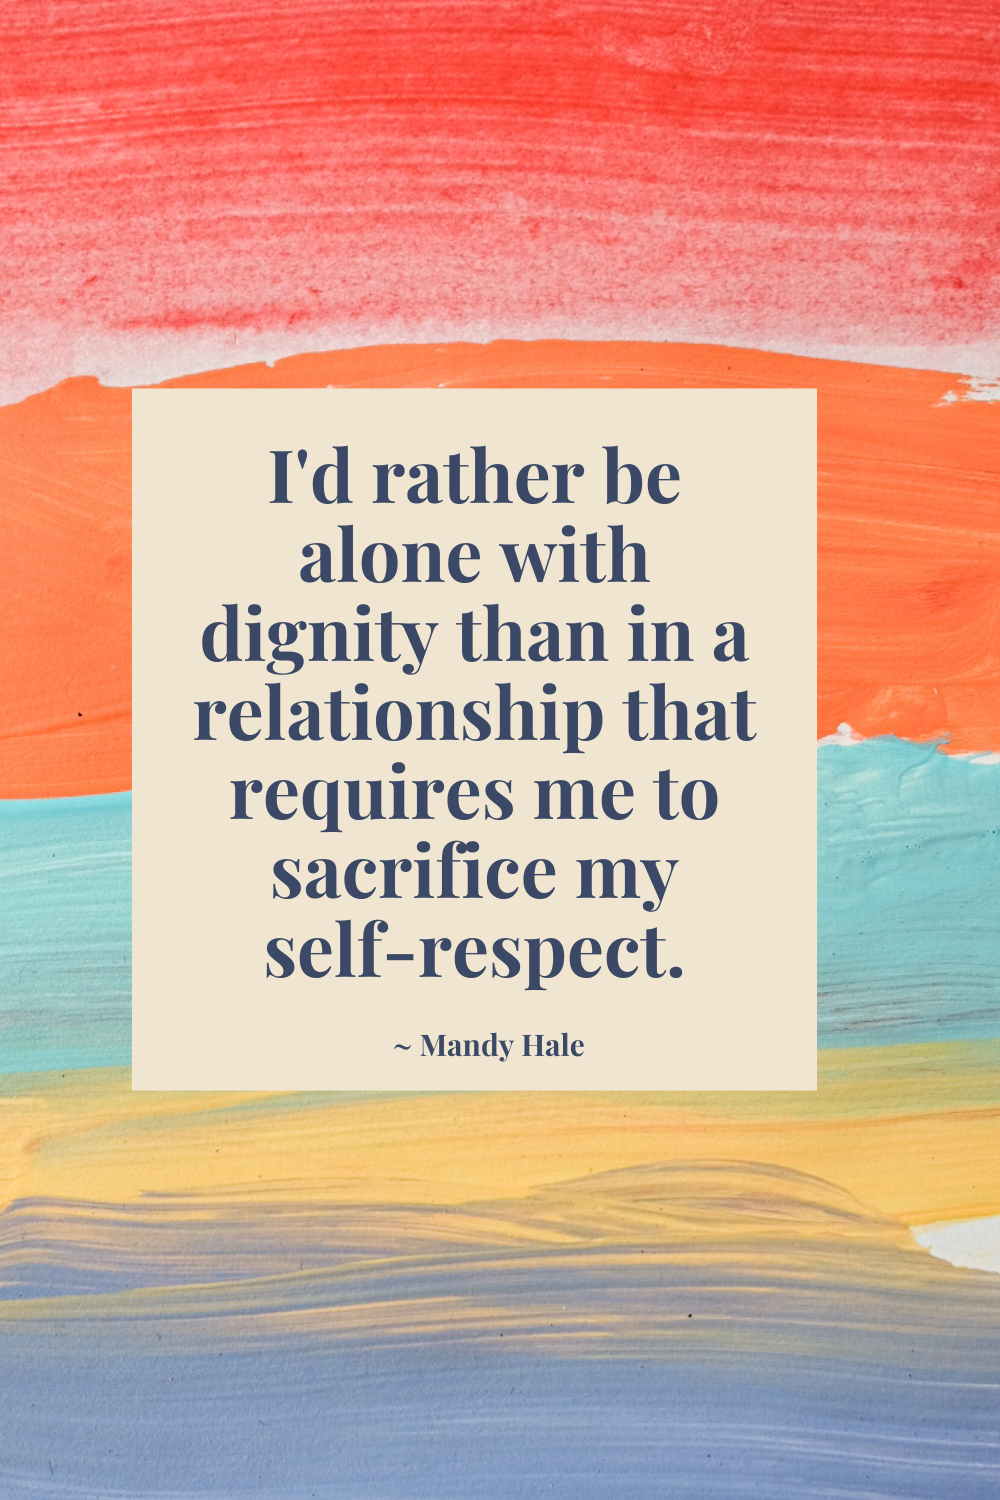 I'd rather be alone with dignity than in a relationship that requires me to sacrifice my self respect.